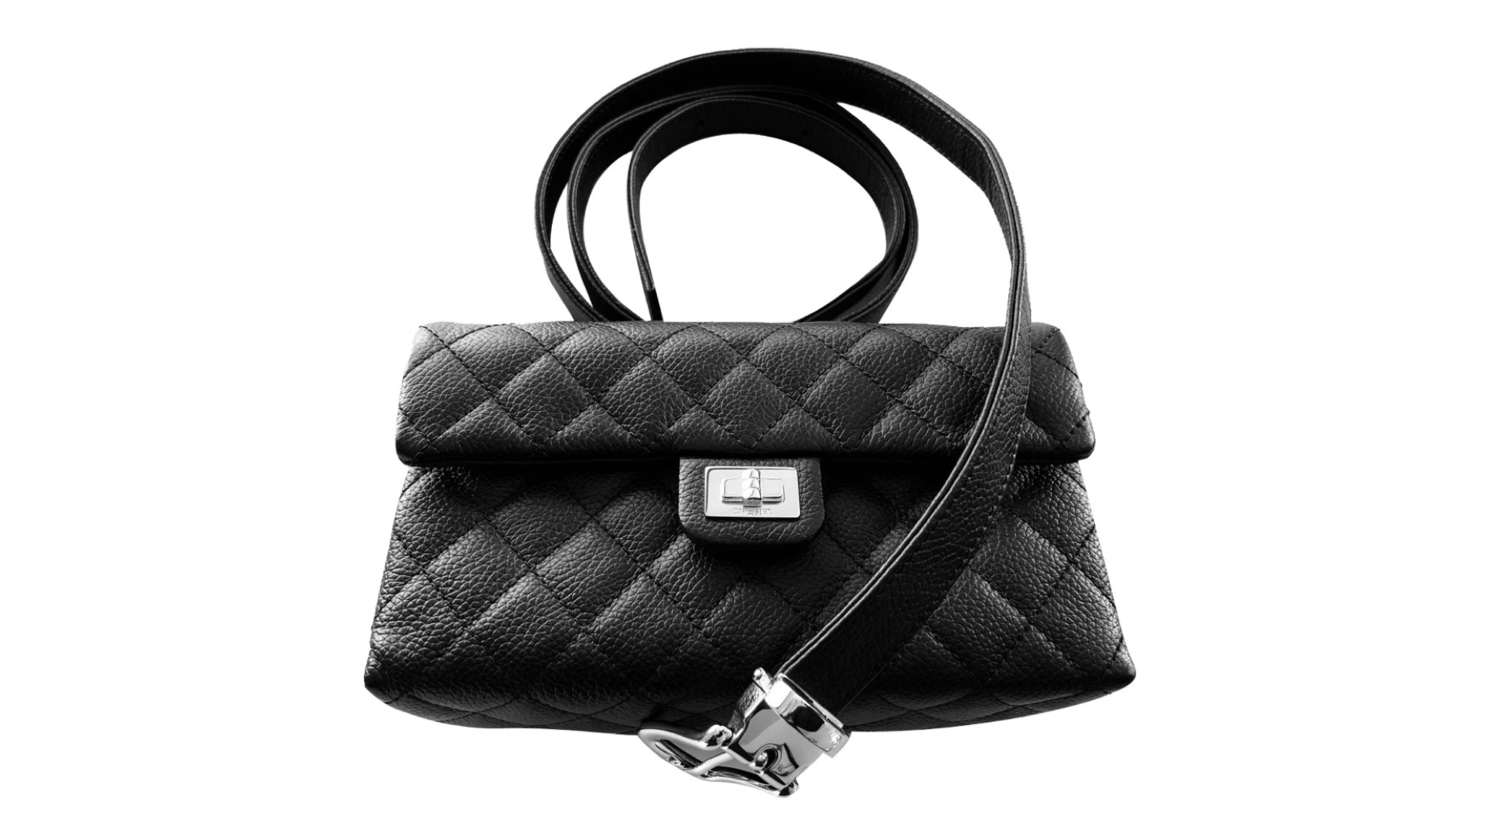 Chanel Black Grained Quilted Leather 2.55 Reissue Waist Belt Bag